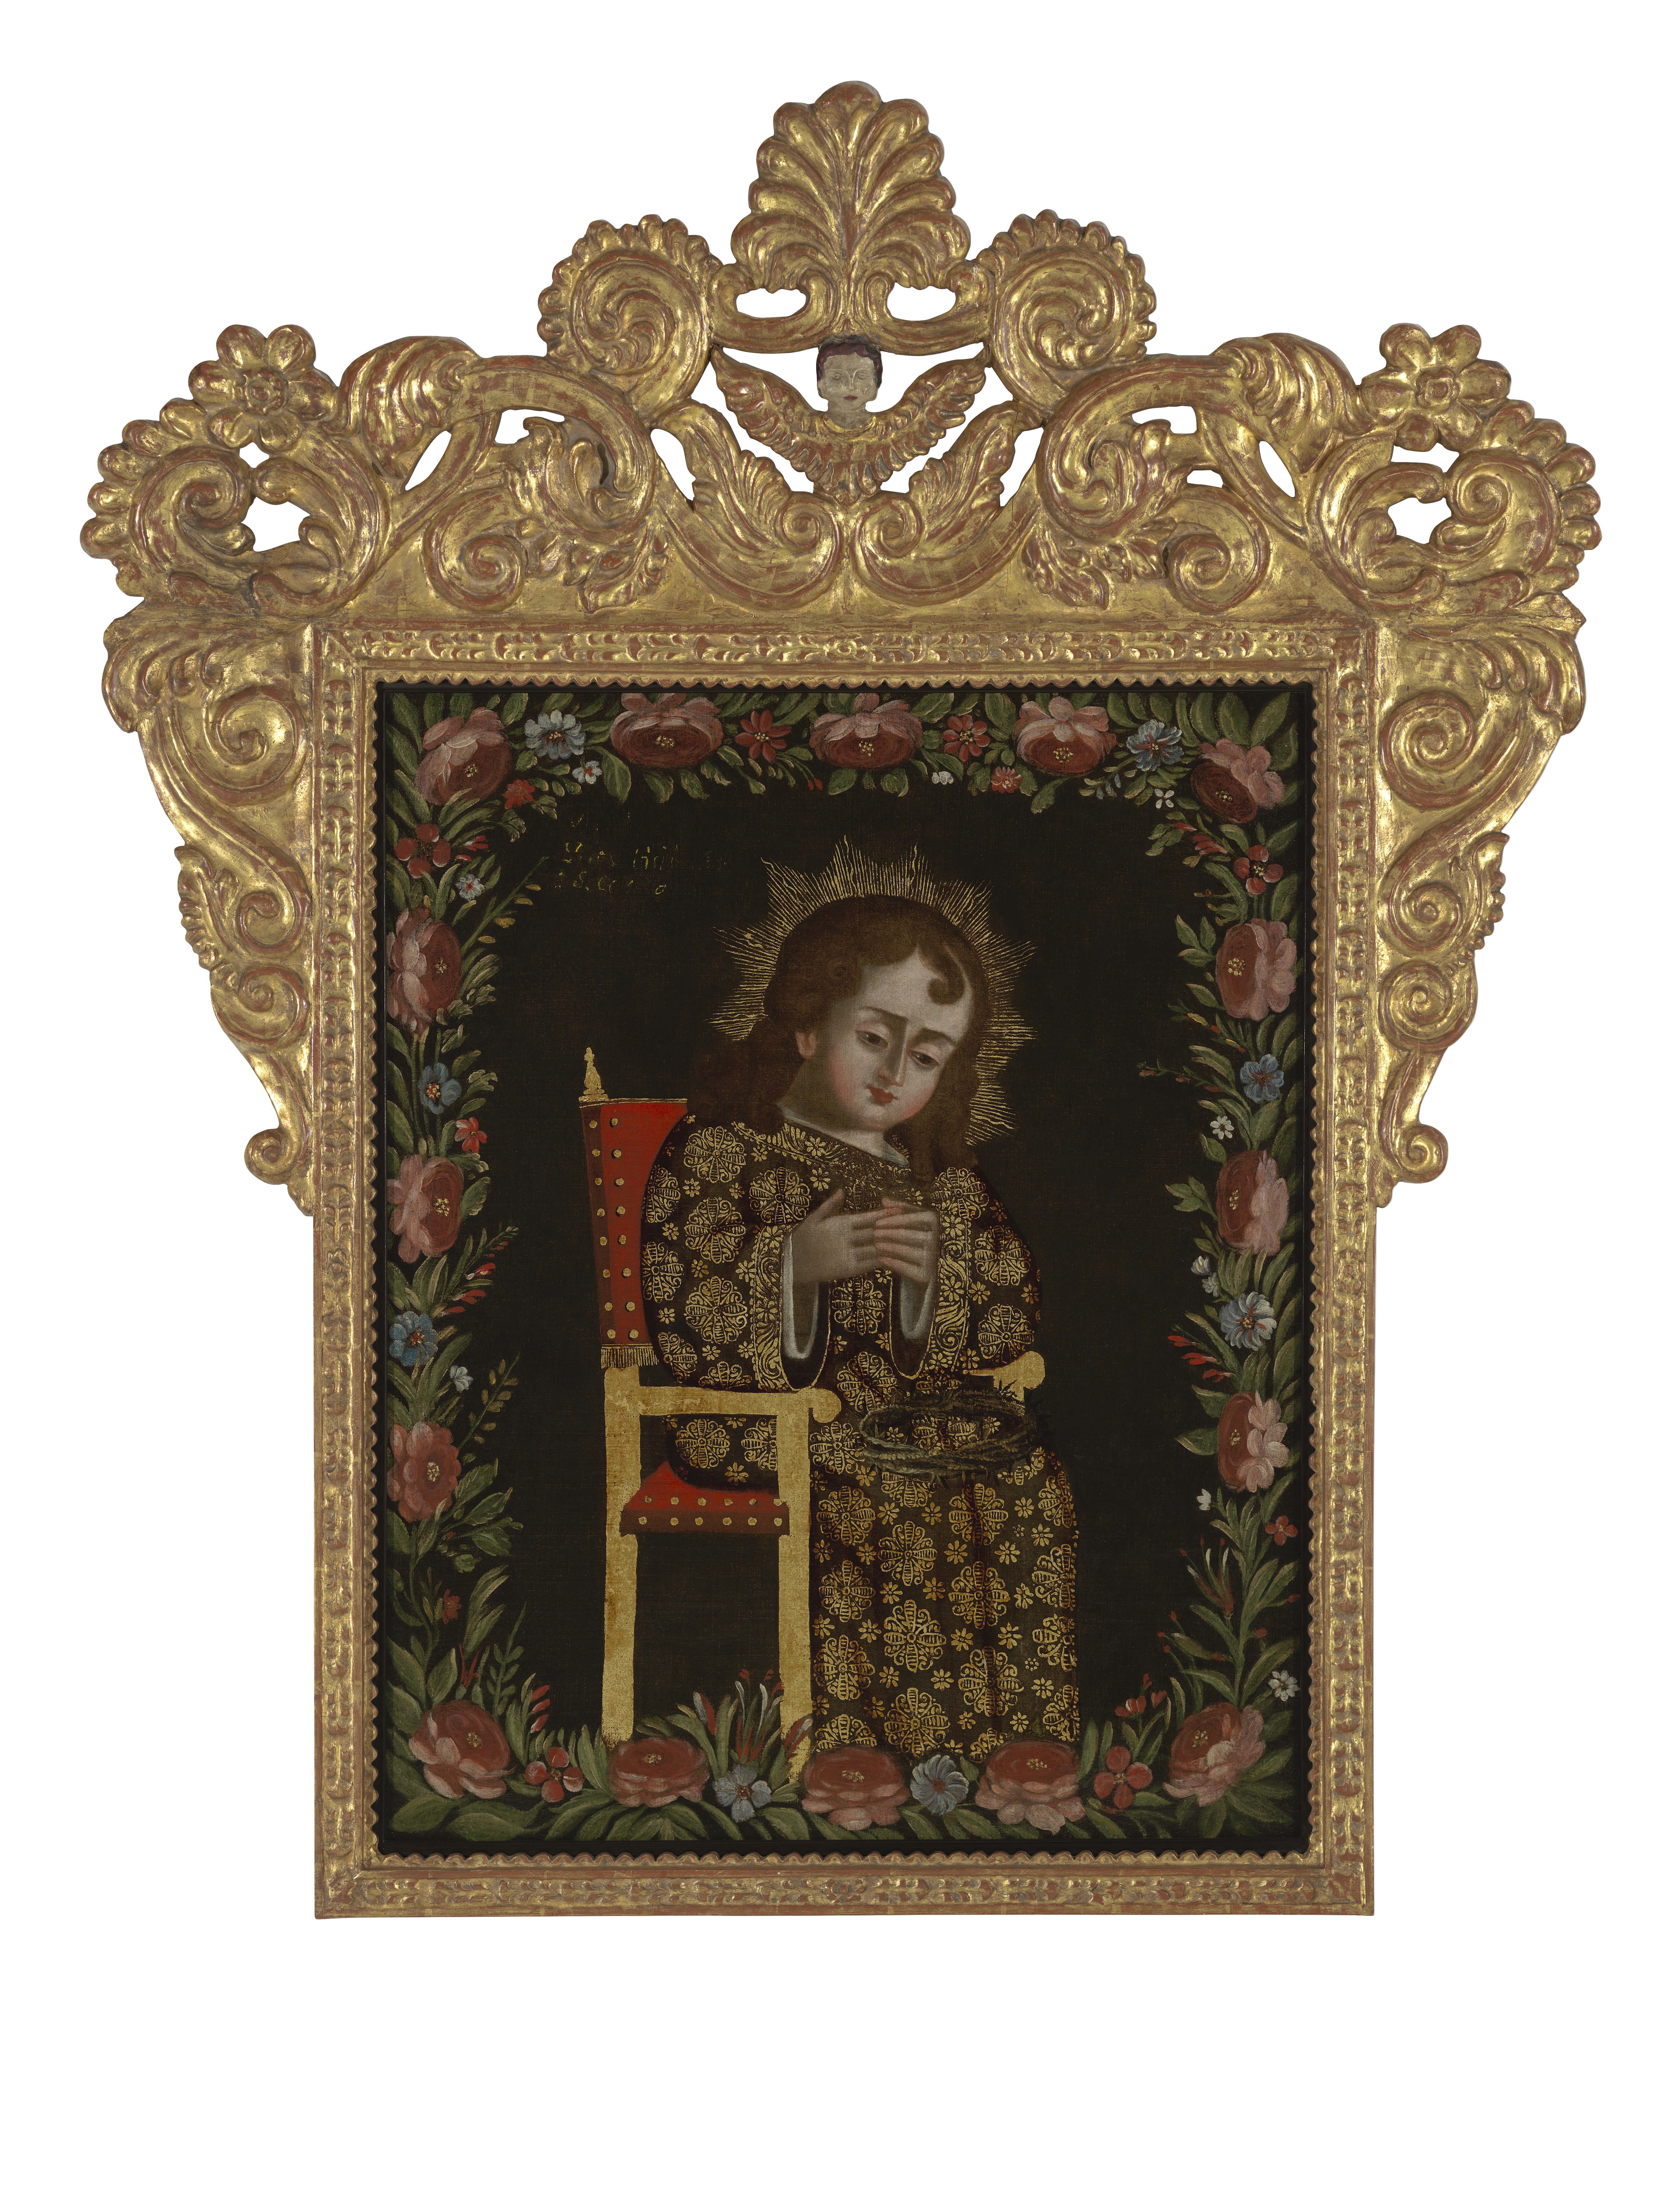 A painting depicting the Christ Child sitting on a Friar's chair, holding his finger that has be pricked by the crown of thorns on his lap.